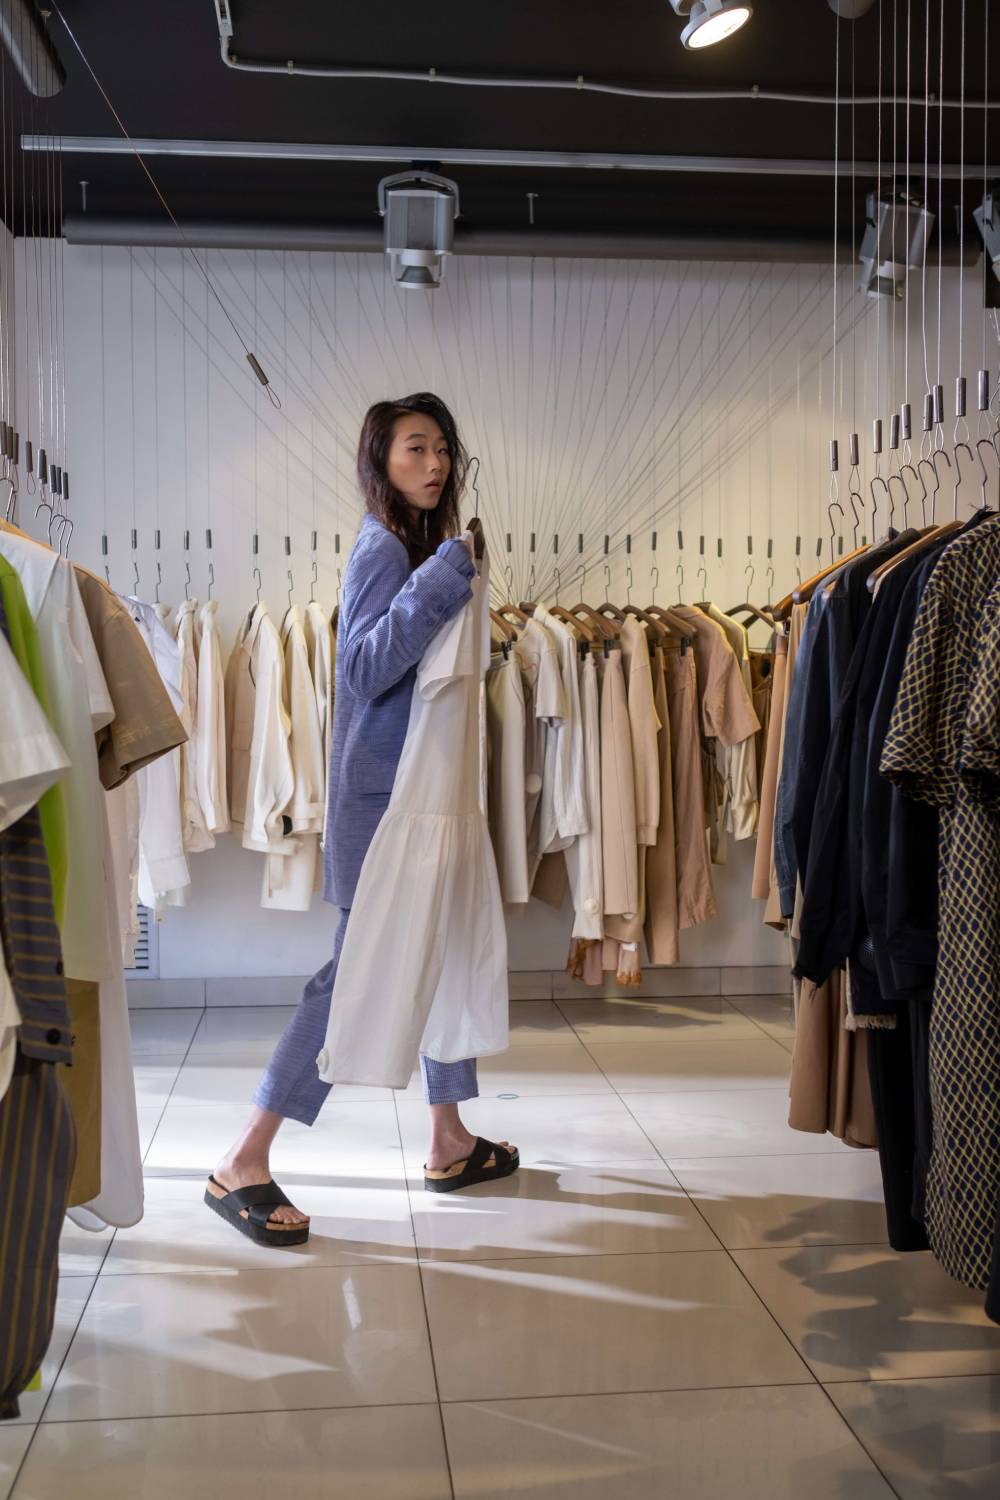 Tips For Selling Your Clothes At Consignment Shops